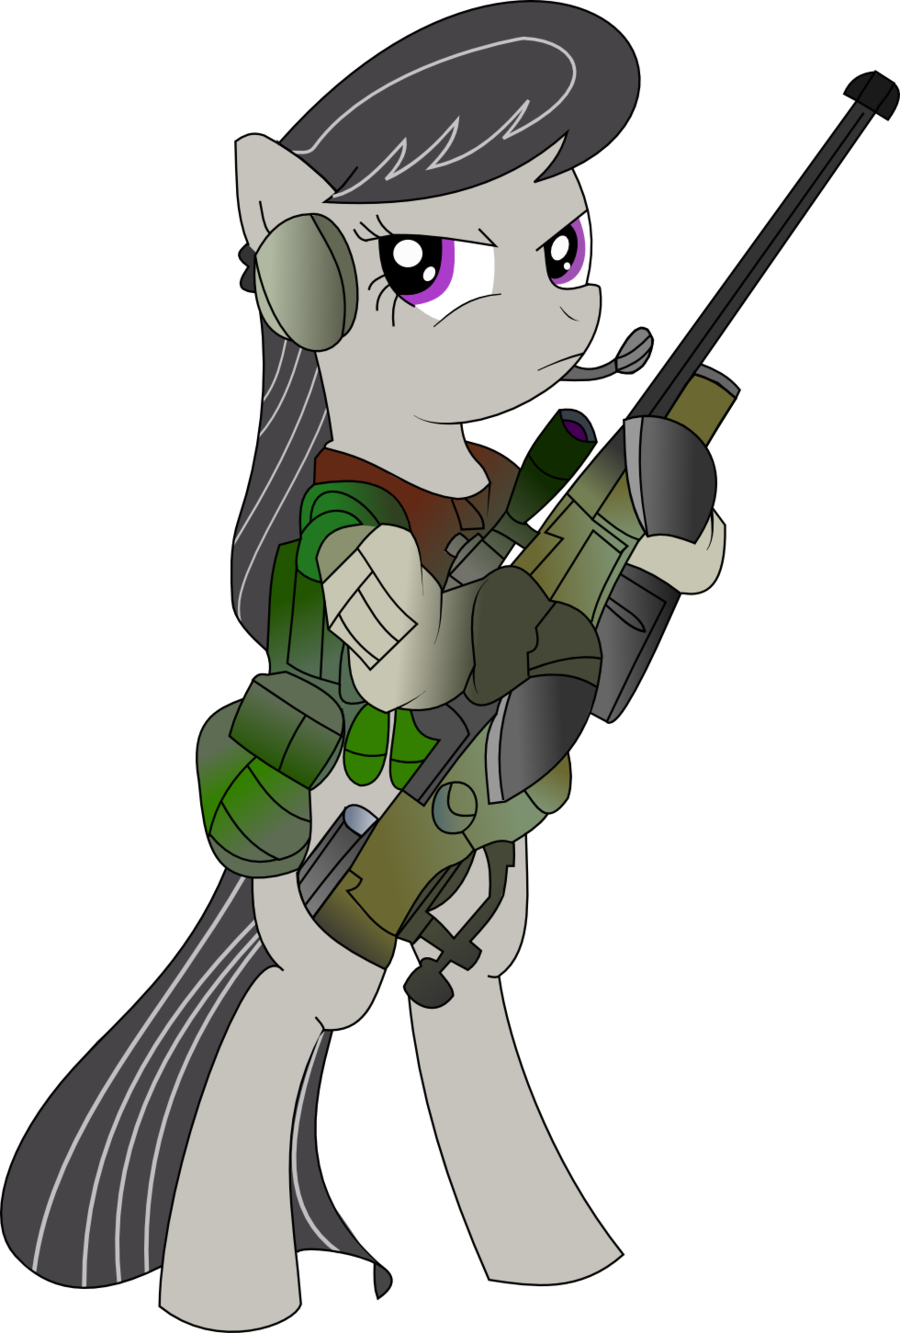 [Bild: img-2032760-3-armed_octavia_by_shysolid-d5aa4su.png]